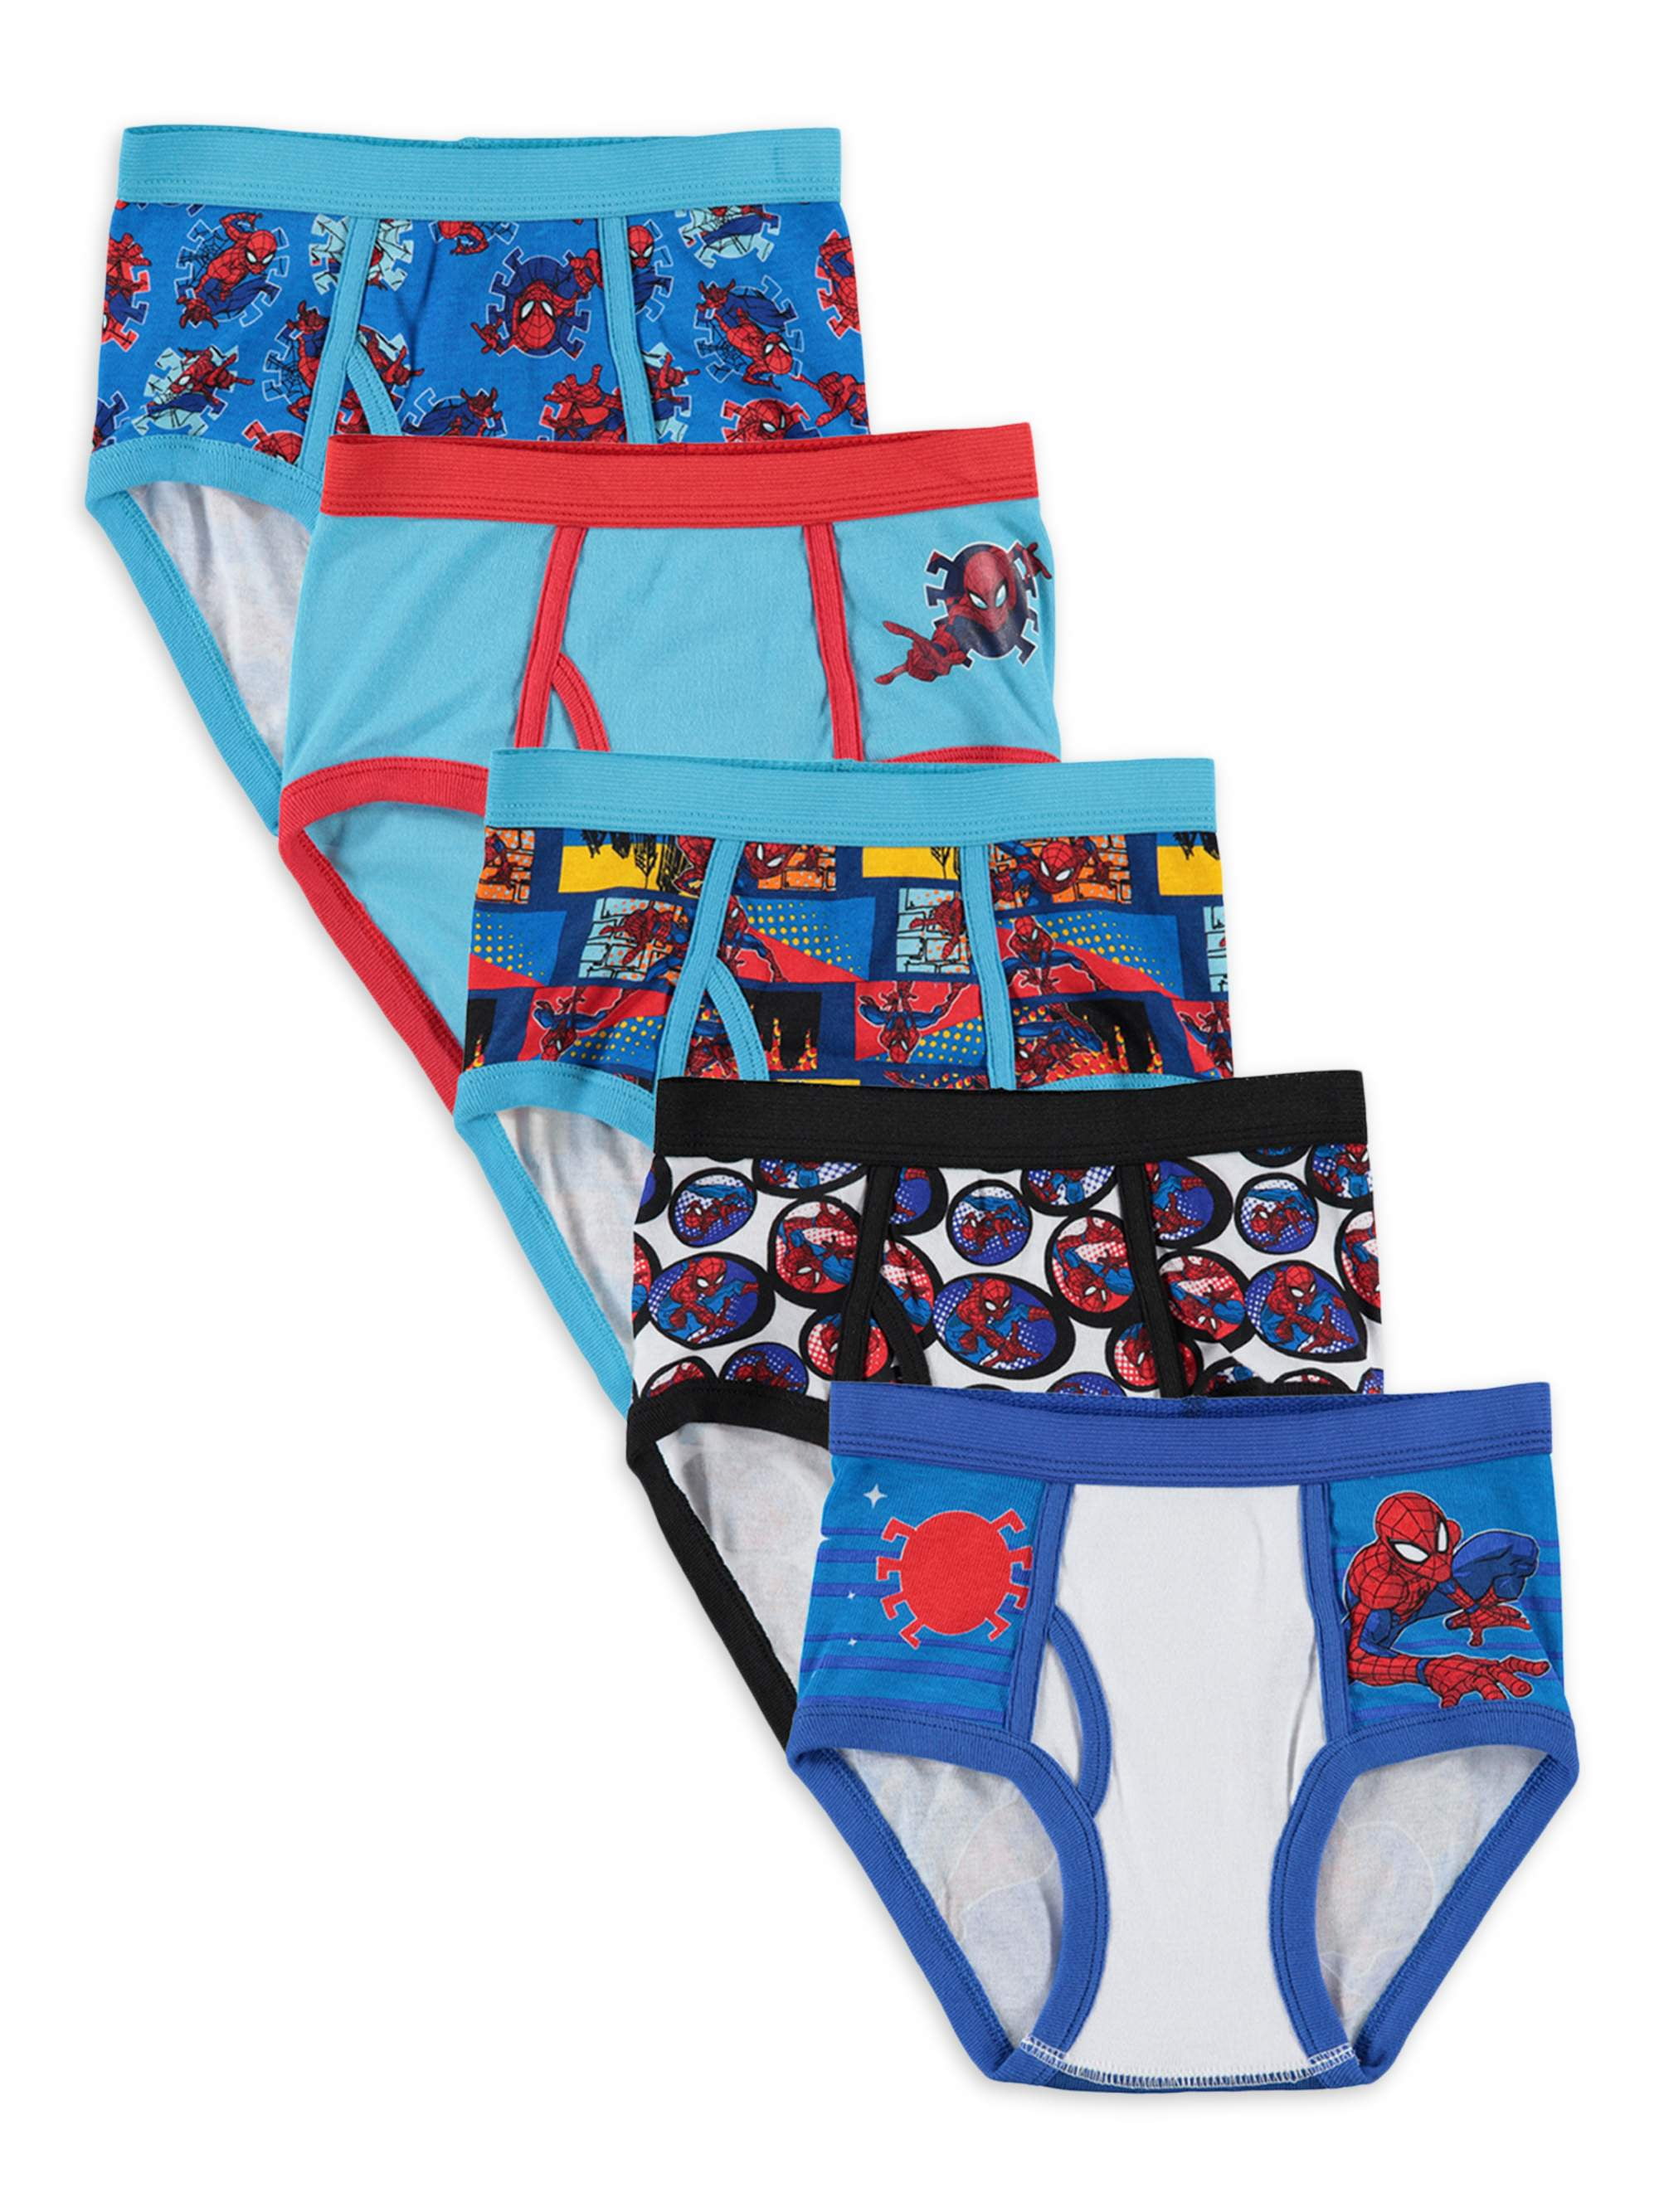 Boys Toddlers Slip On 5 pack Cotton Briefs Printed Underwear Size Age 2 3 4 5 6 